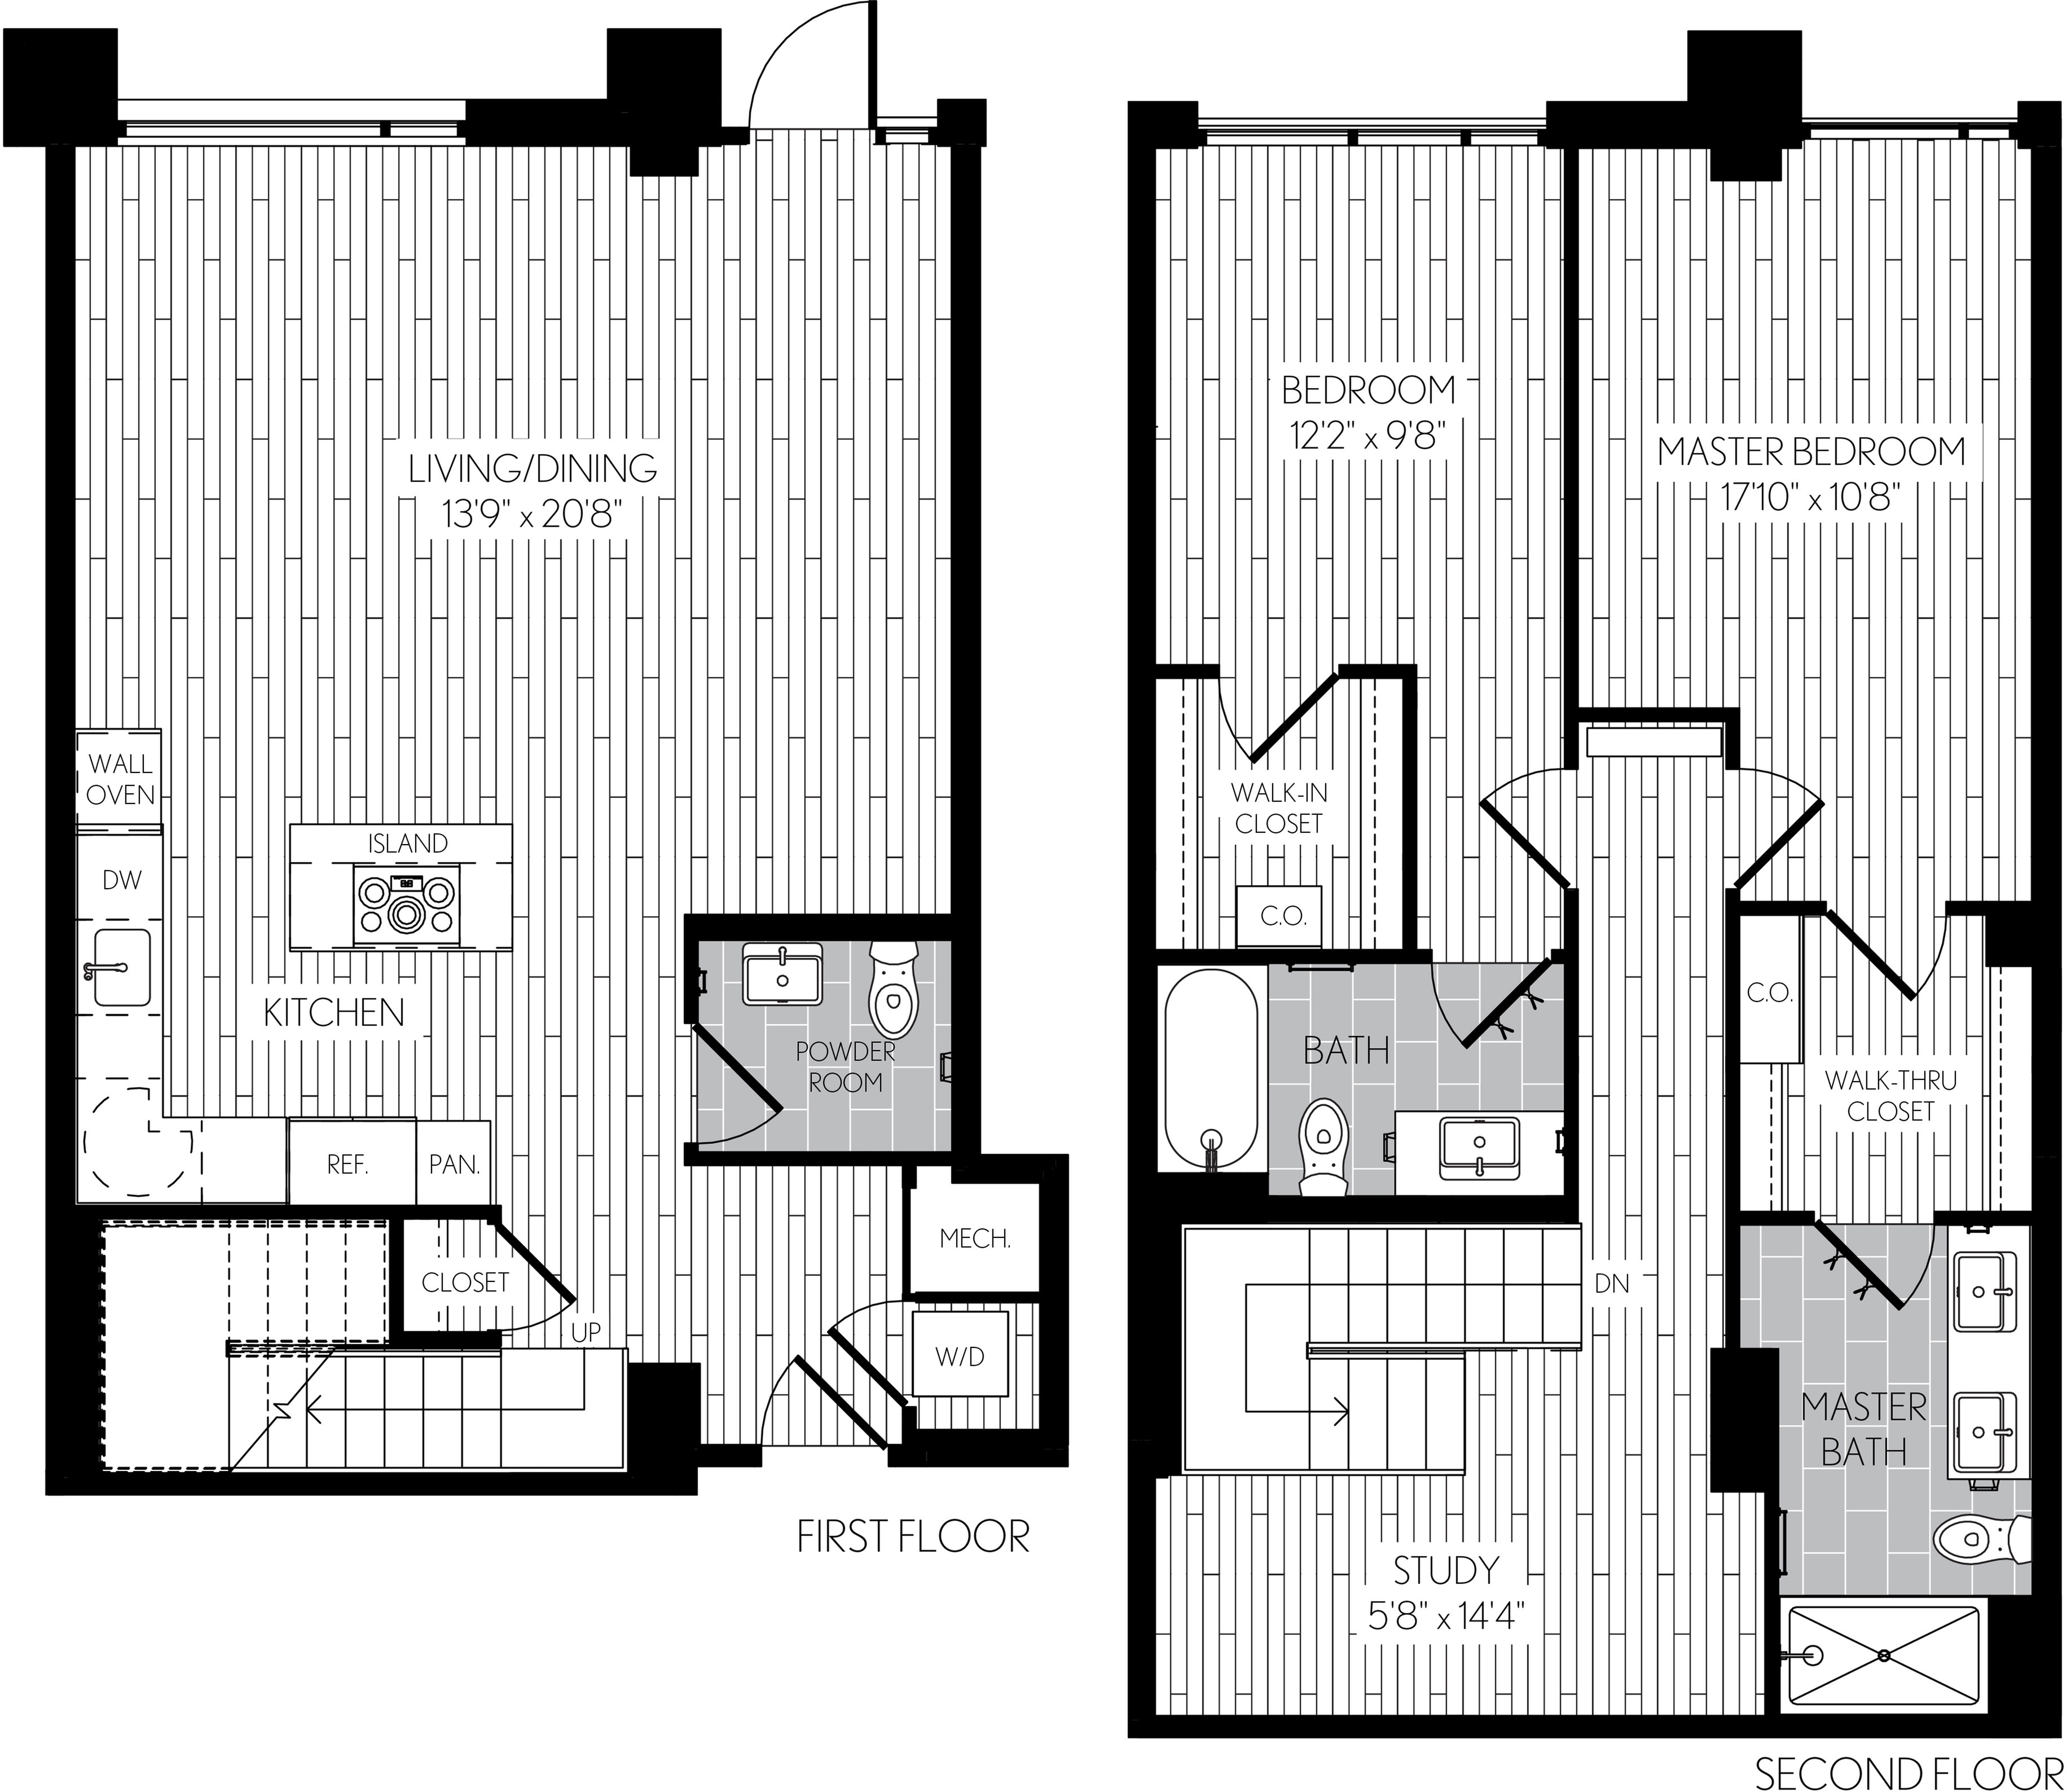 1466 square foot two bedroom two and a half bath two level apartment floorplan image with right side stair case